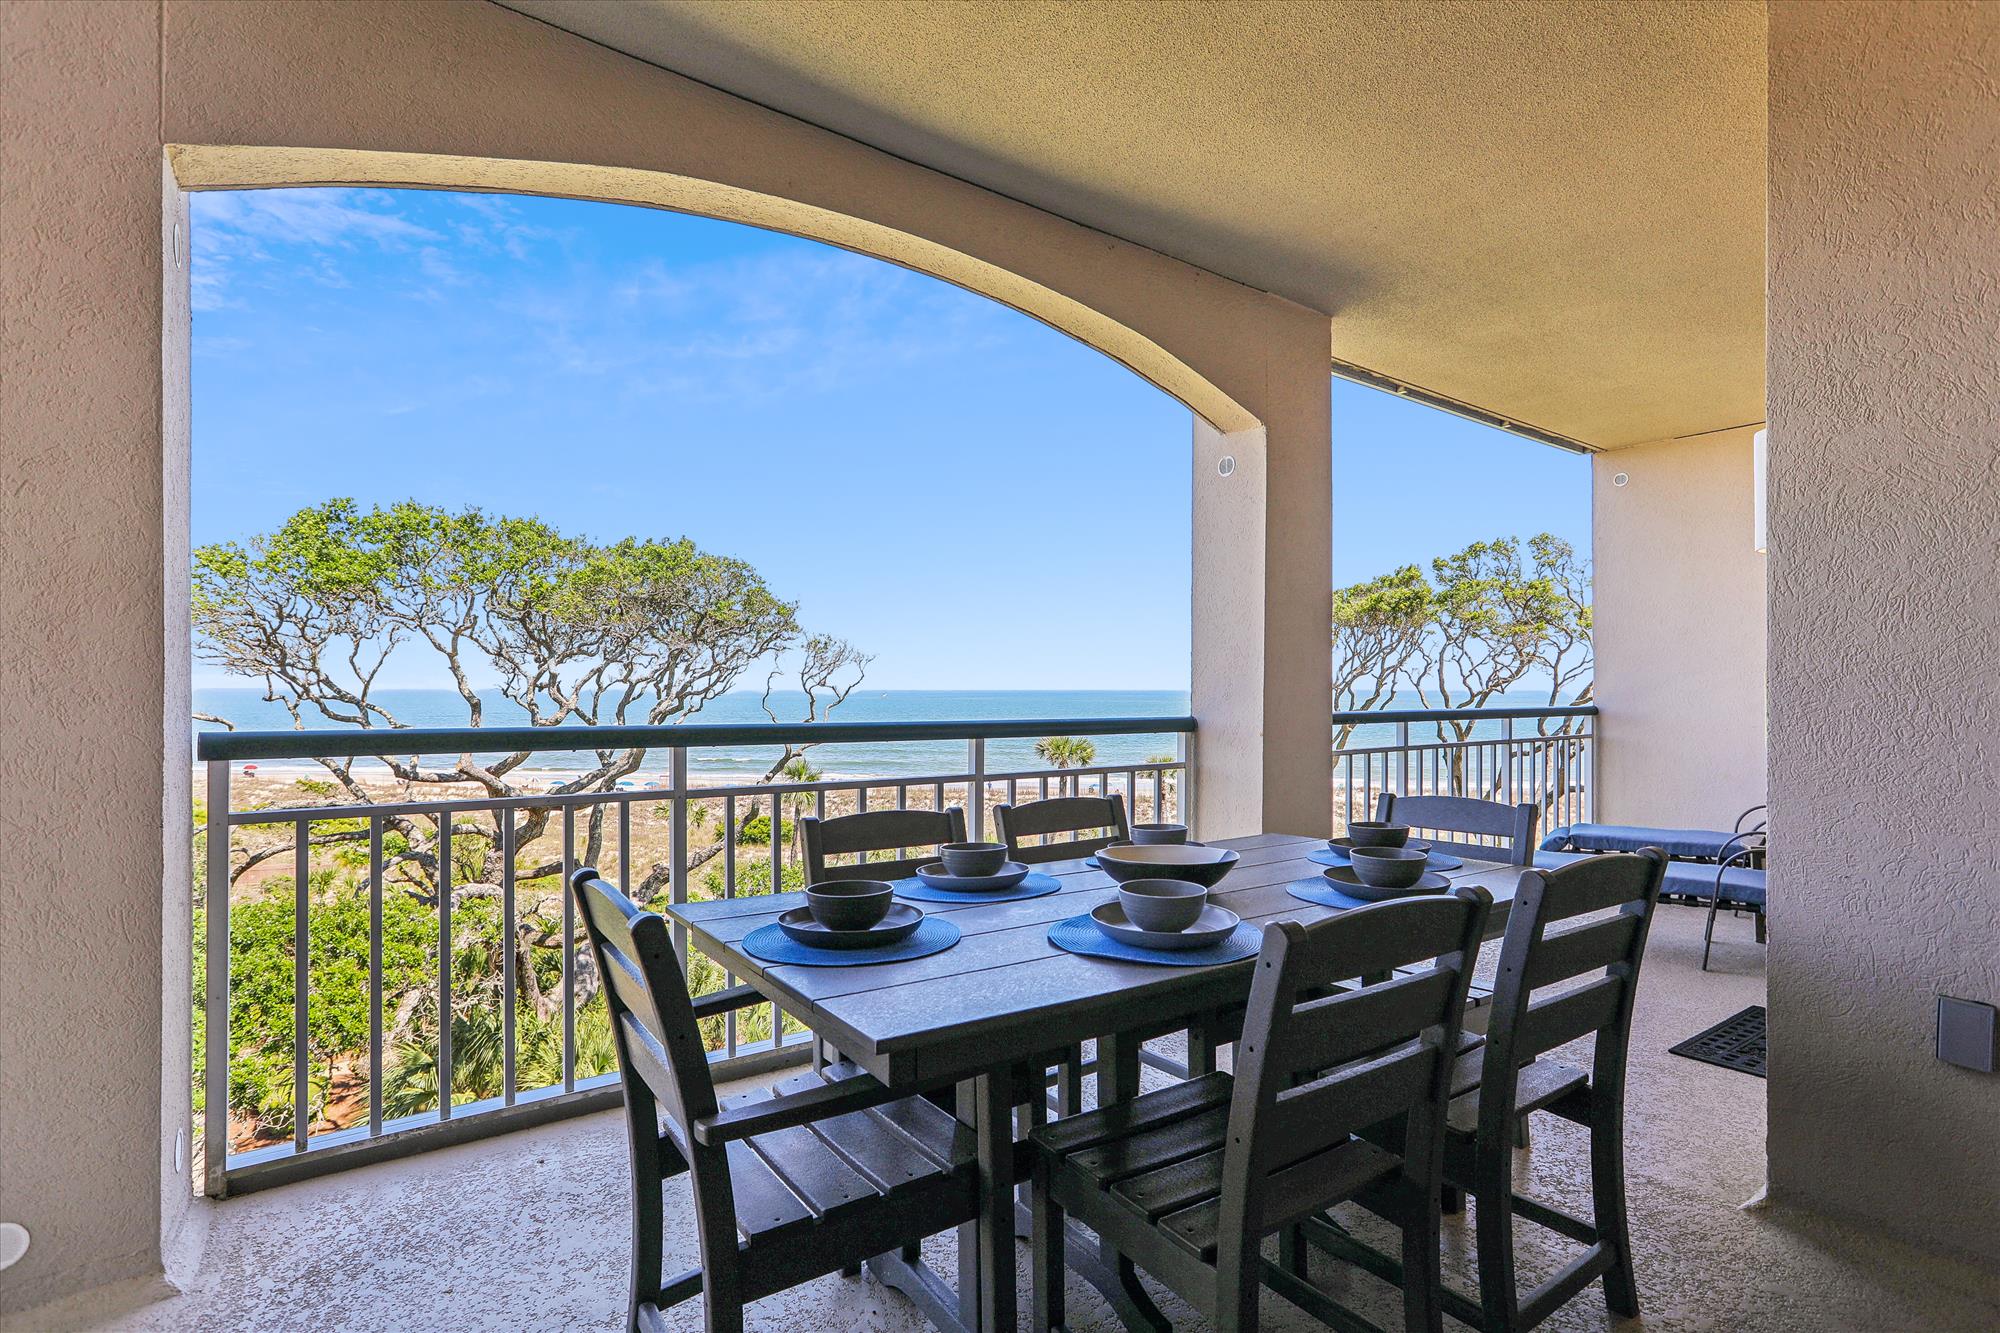 Dine Outdoors with Ocean Views at 3408 Windsor Court South